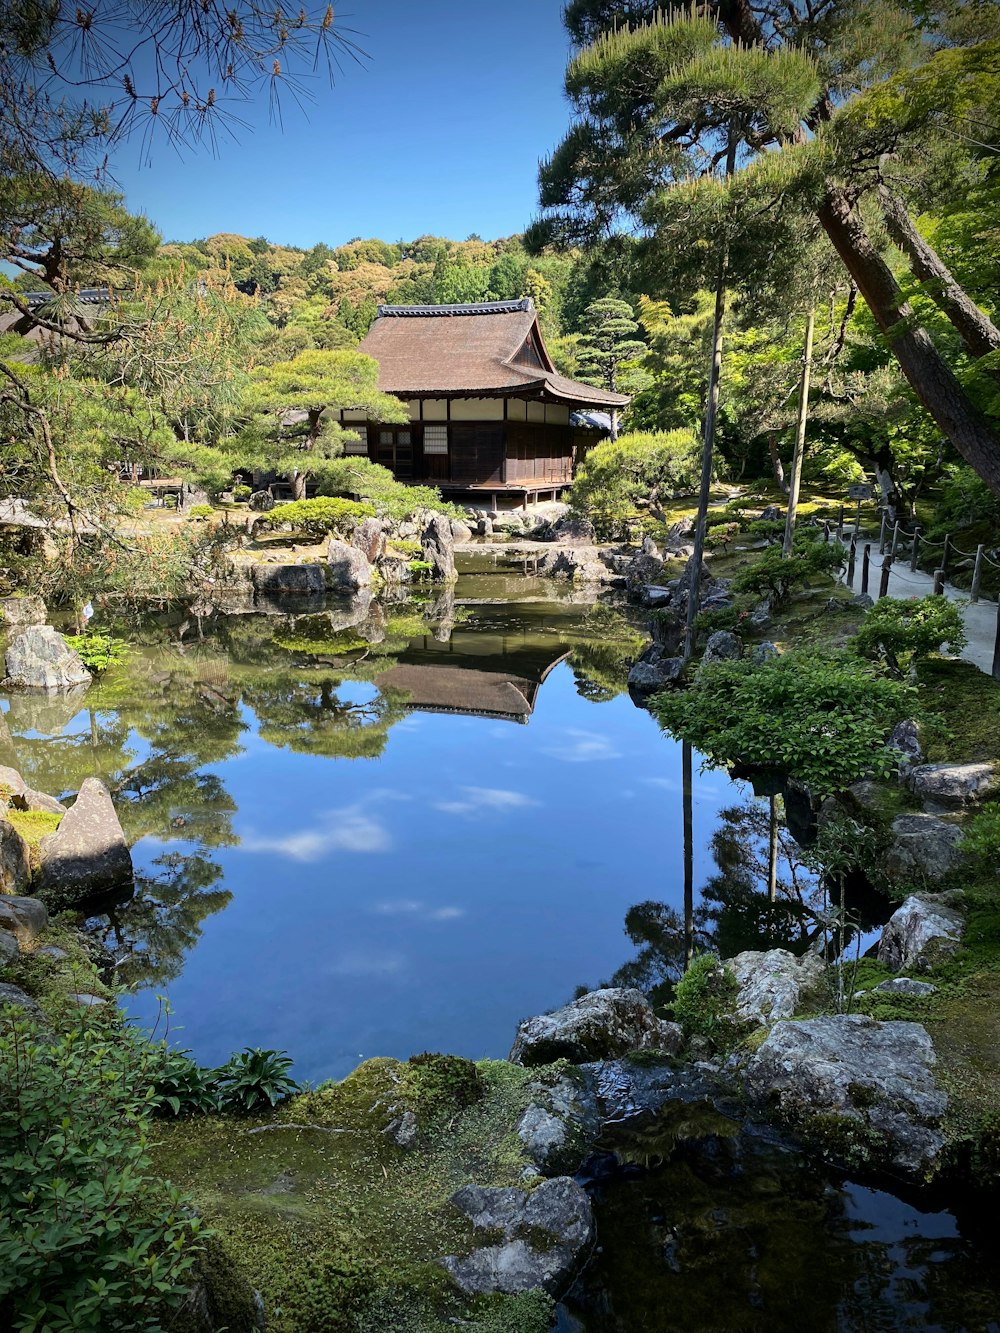 a pond surrounded by rocks and trees with a building in the background